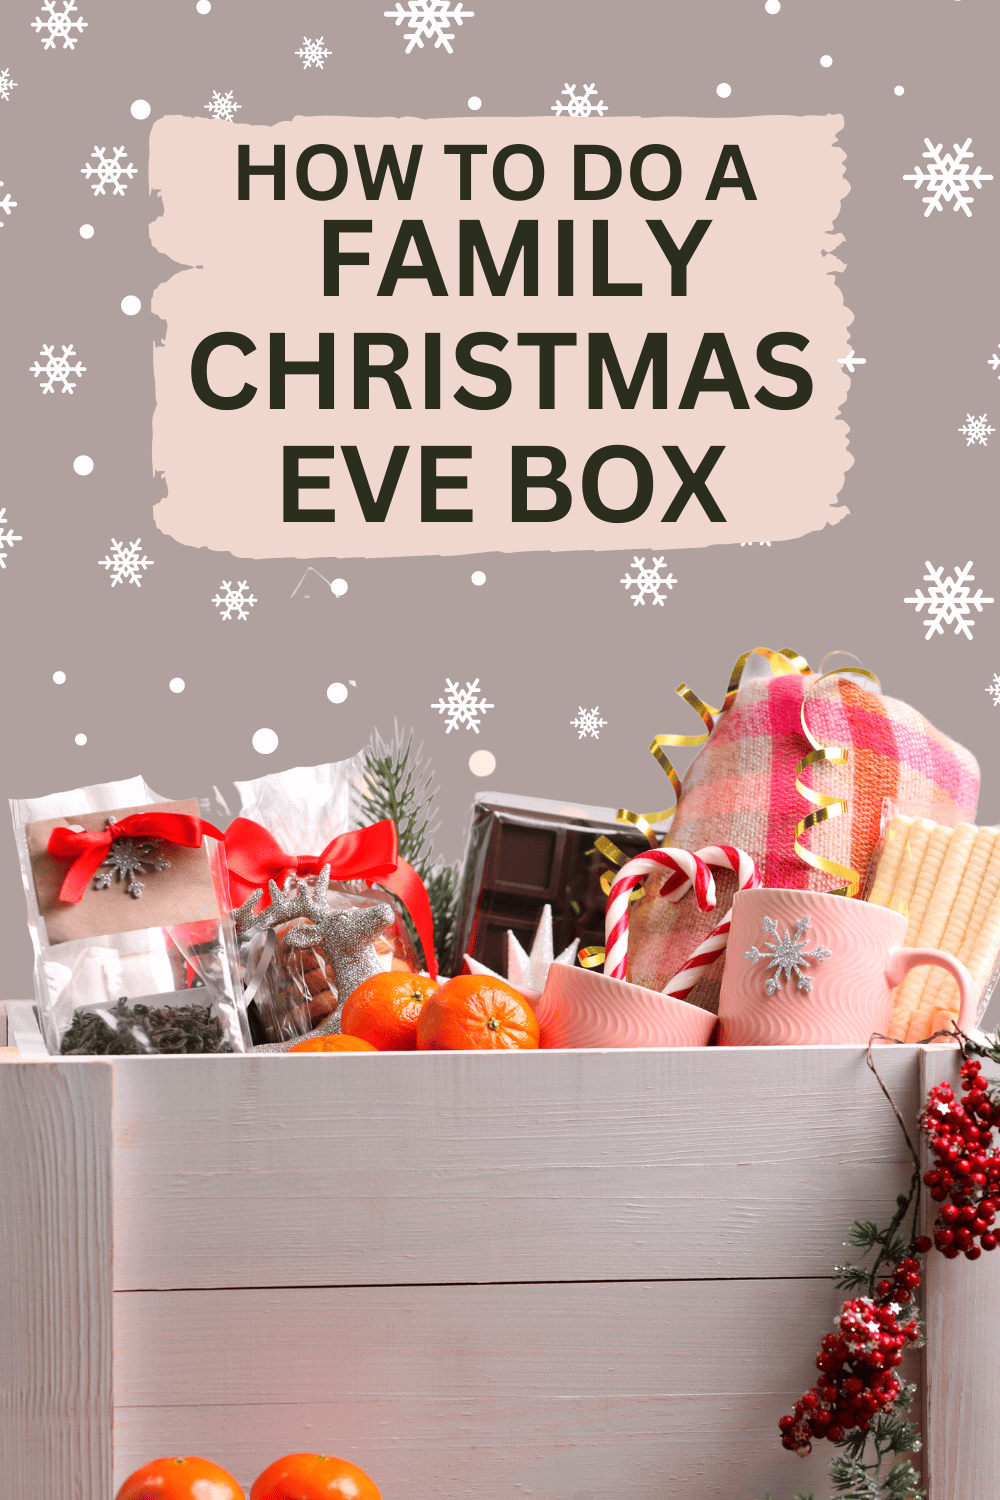 How To Do The Night Before Christmas Box: Christmas Eve Boxes make best gifts for festive season filled holiday gift craft in front of a backdrop of snowflakes